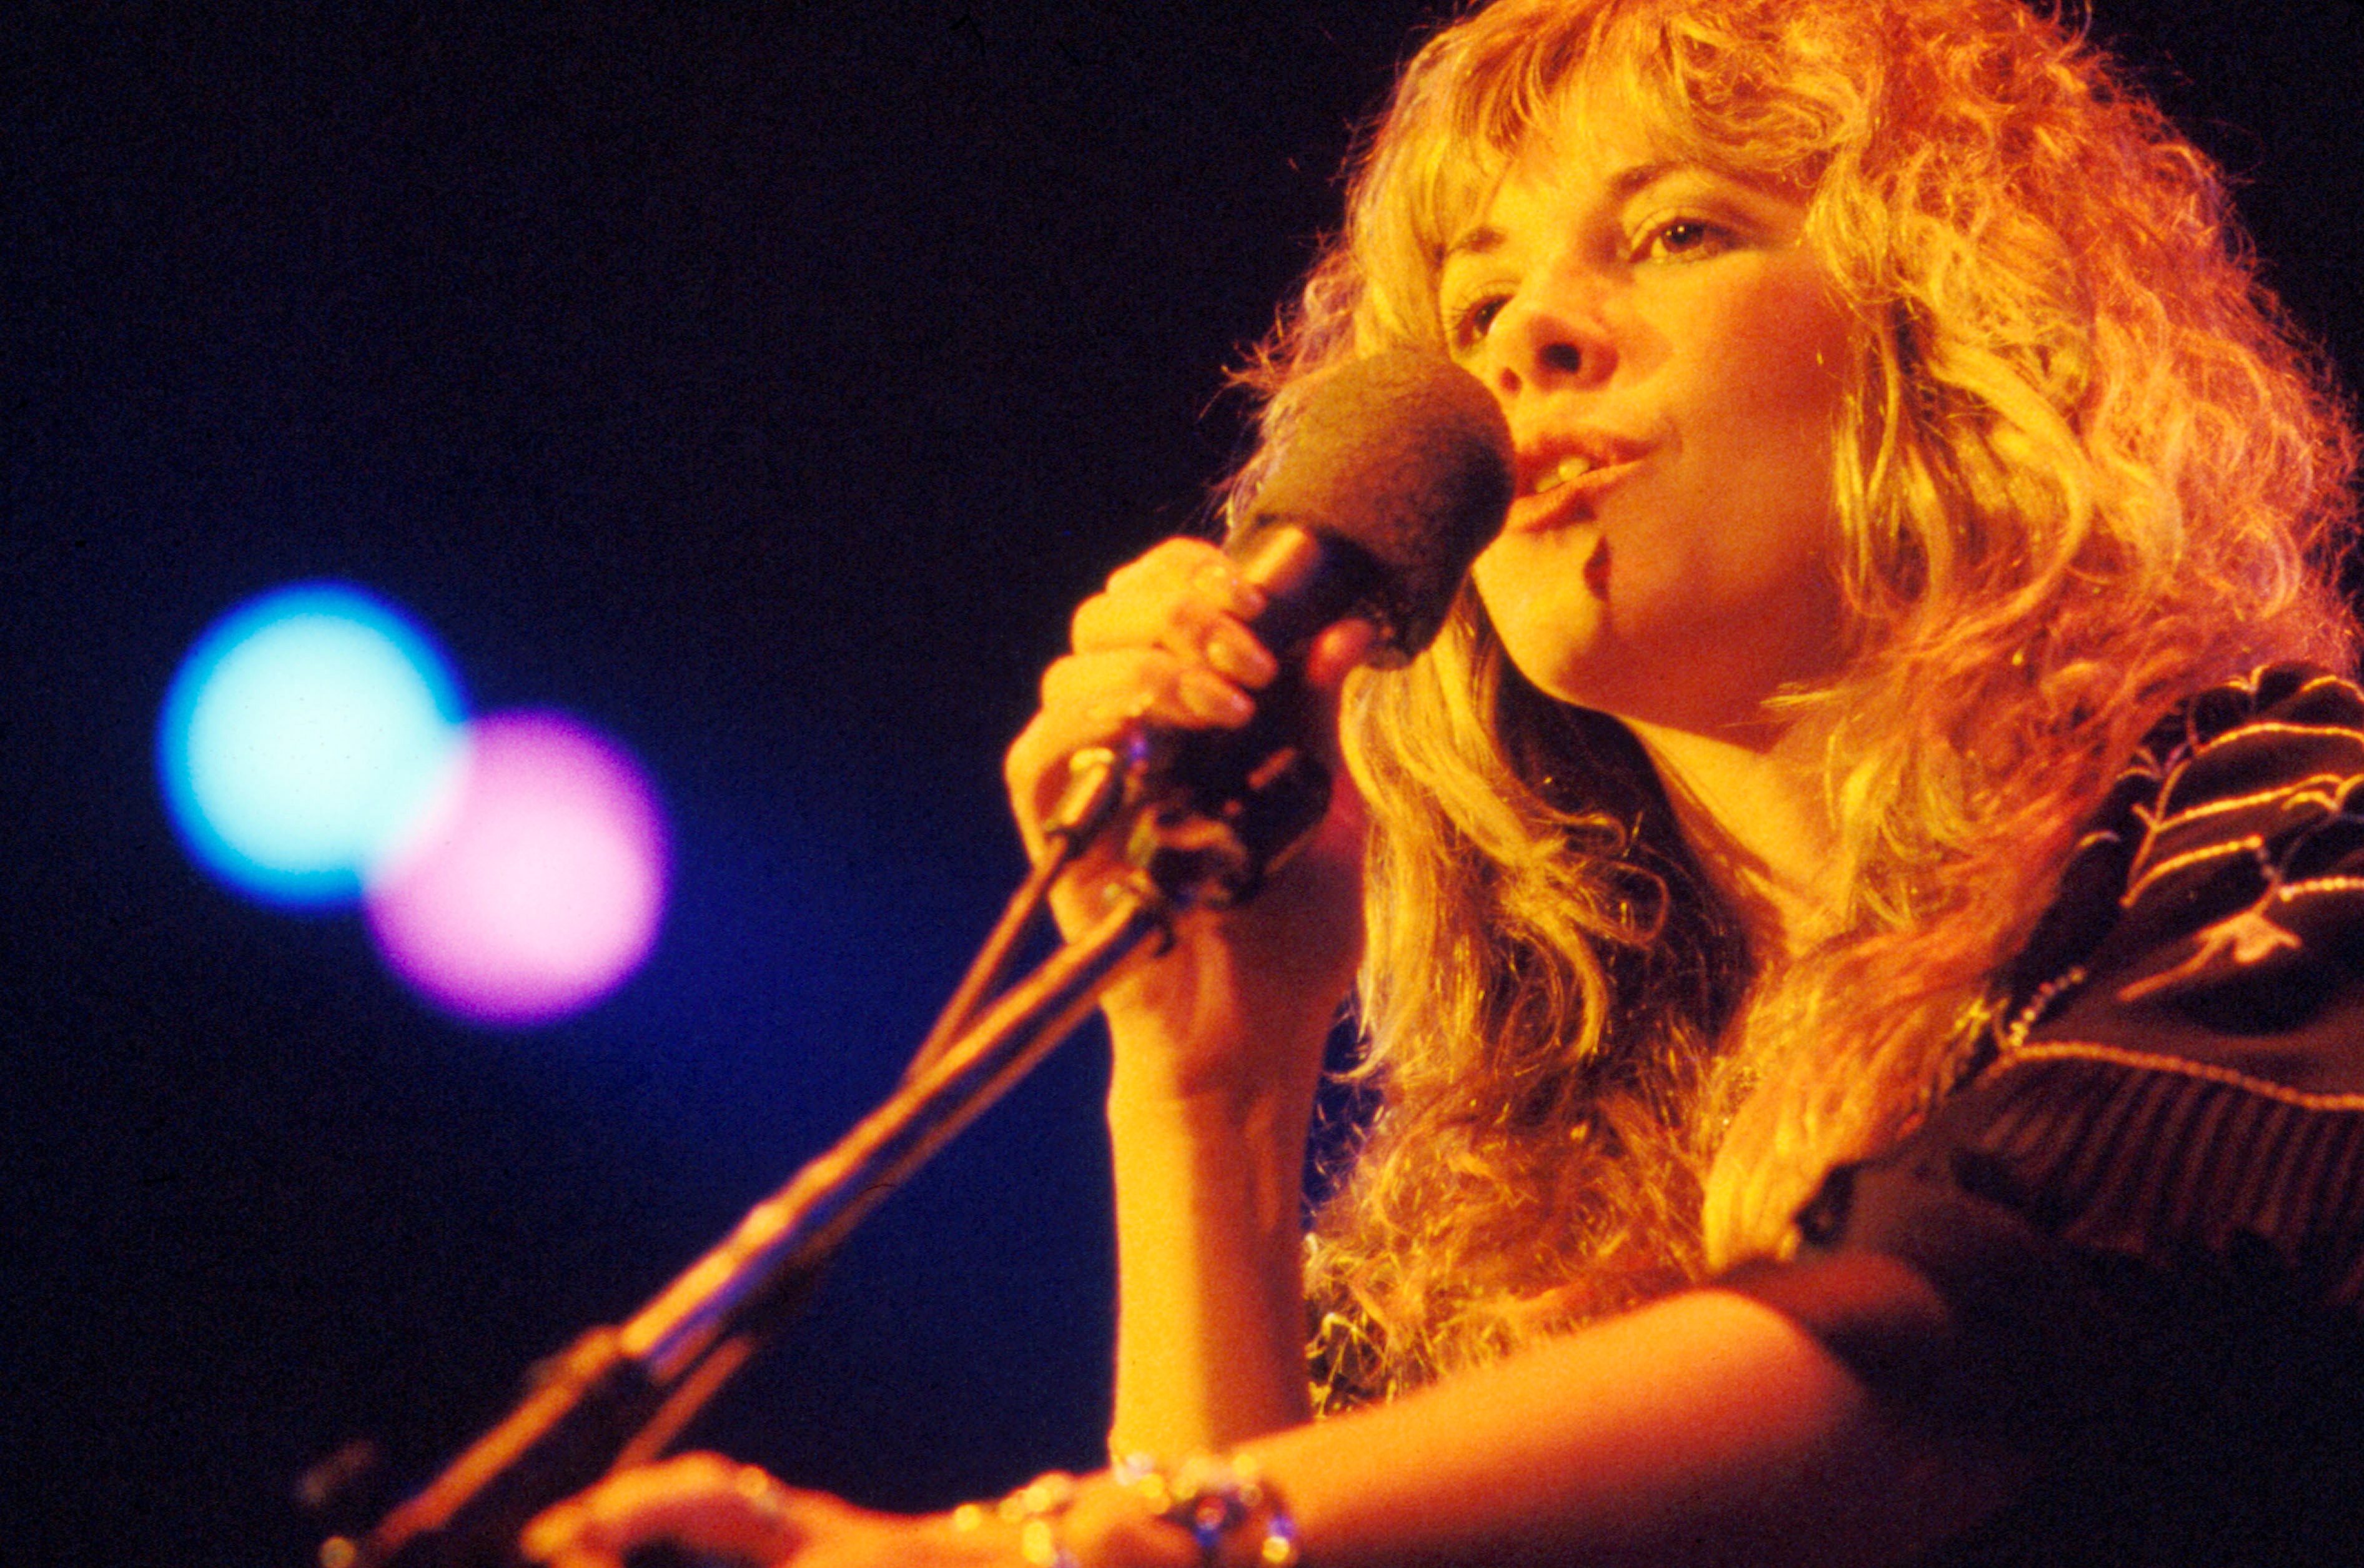 Stevie Nicks wears a black shirt and holds a microphone.